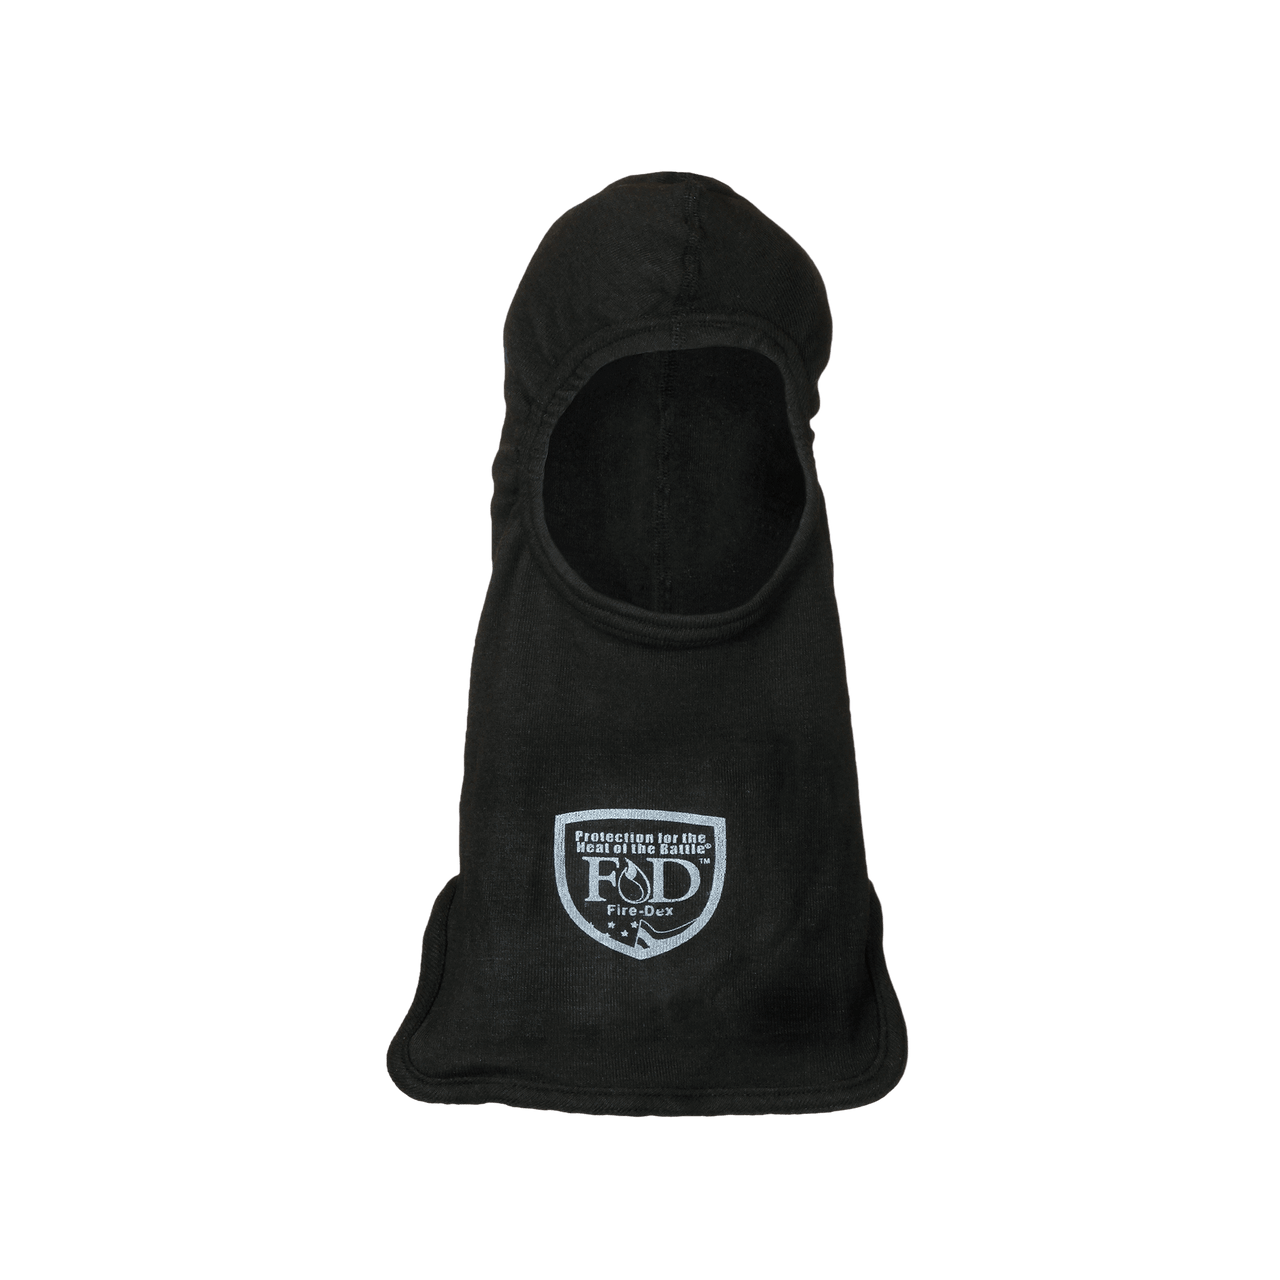 Fire-Dex H61 Classic Fire Hood|  The Fire Center | Fuego Fire Center | Store | FIREFIGHTER GEAR | FREE SHIPPING | The H61 model is a 2-layer tube hood with shoulder notch and bound notch bottom. XL model available for longer hood length. Certified to NFPA 1971.